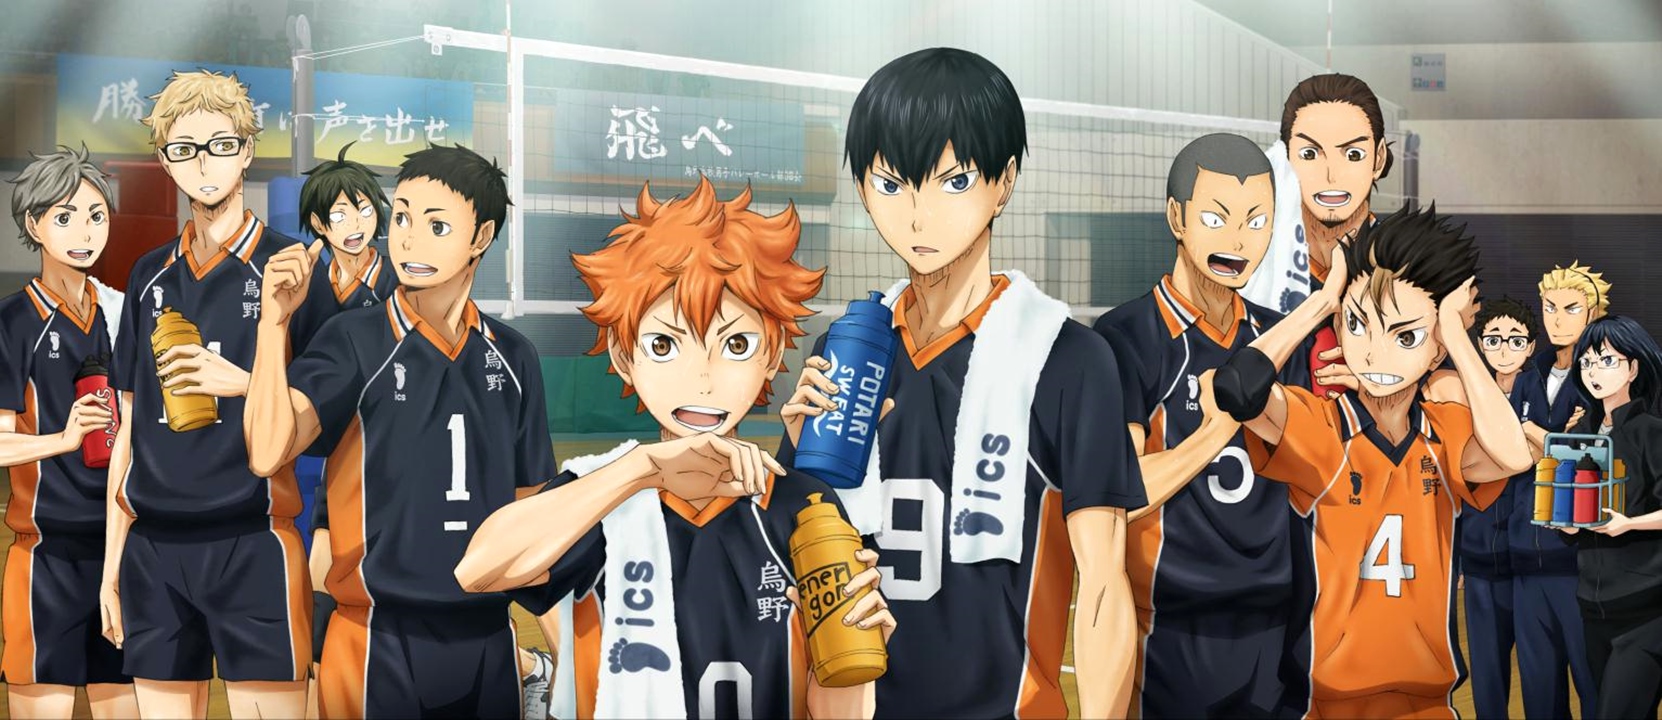 10,000 Anime Fans Voted for the Fictional Schools They Want to Study At haruhichan.com Karasuno High Haikyuu!!